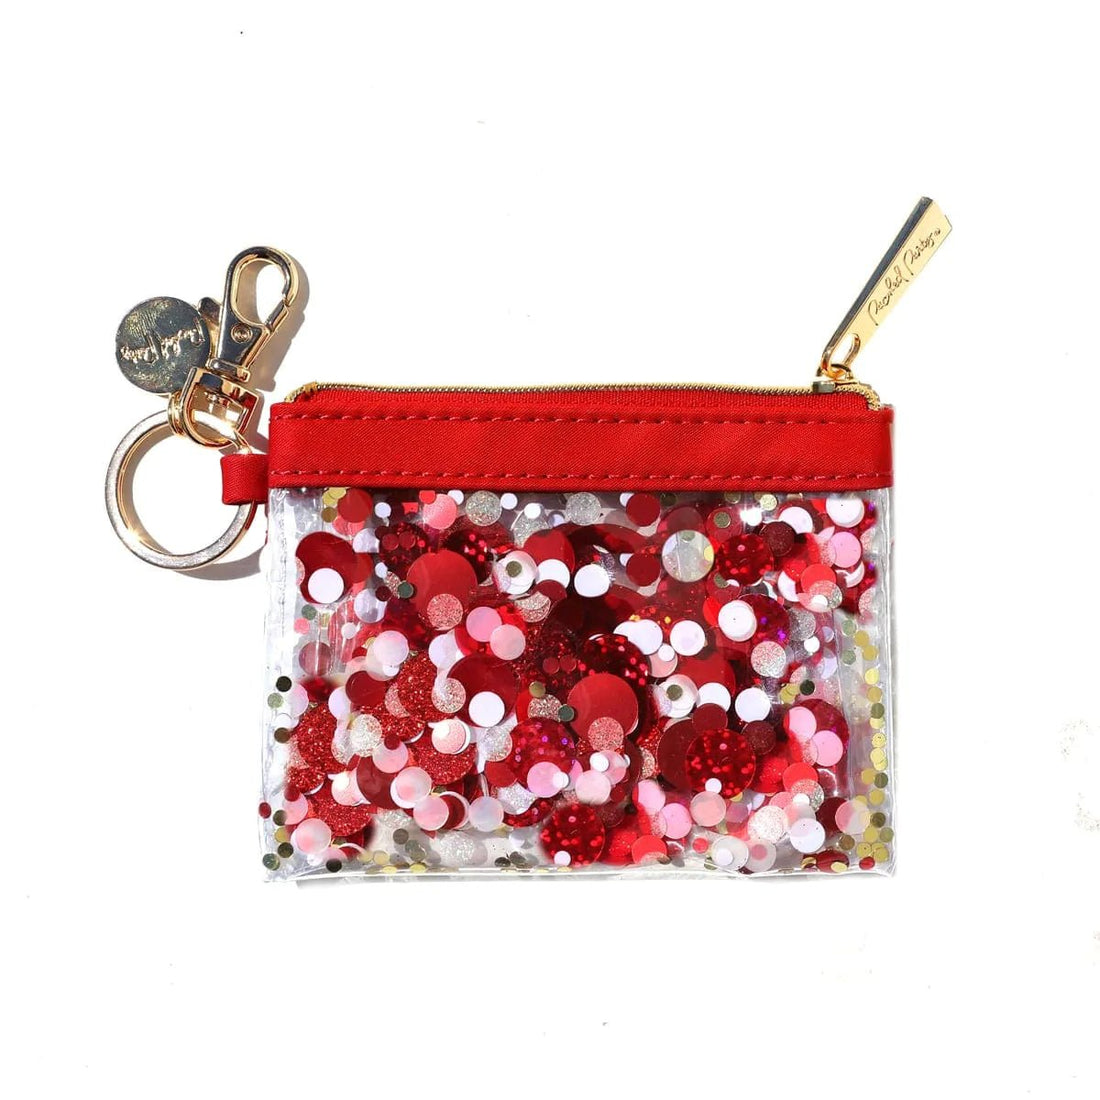 Shop Packed Party Spirit Squad Red Keychain Purse - Premium Purse from Packed Party Online now at Spoiled Brat 